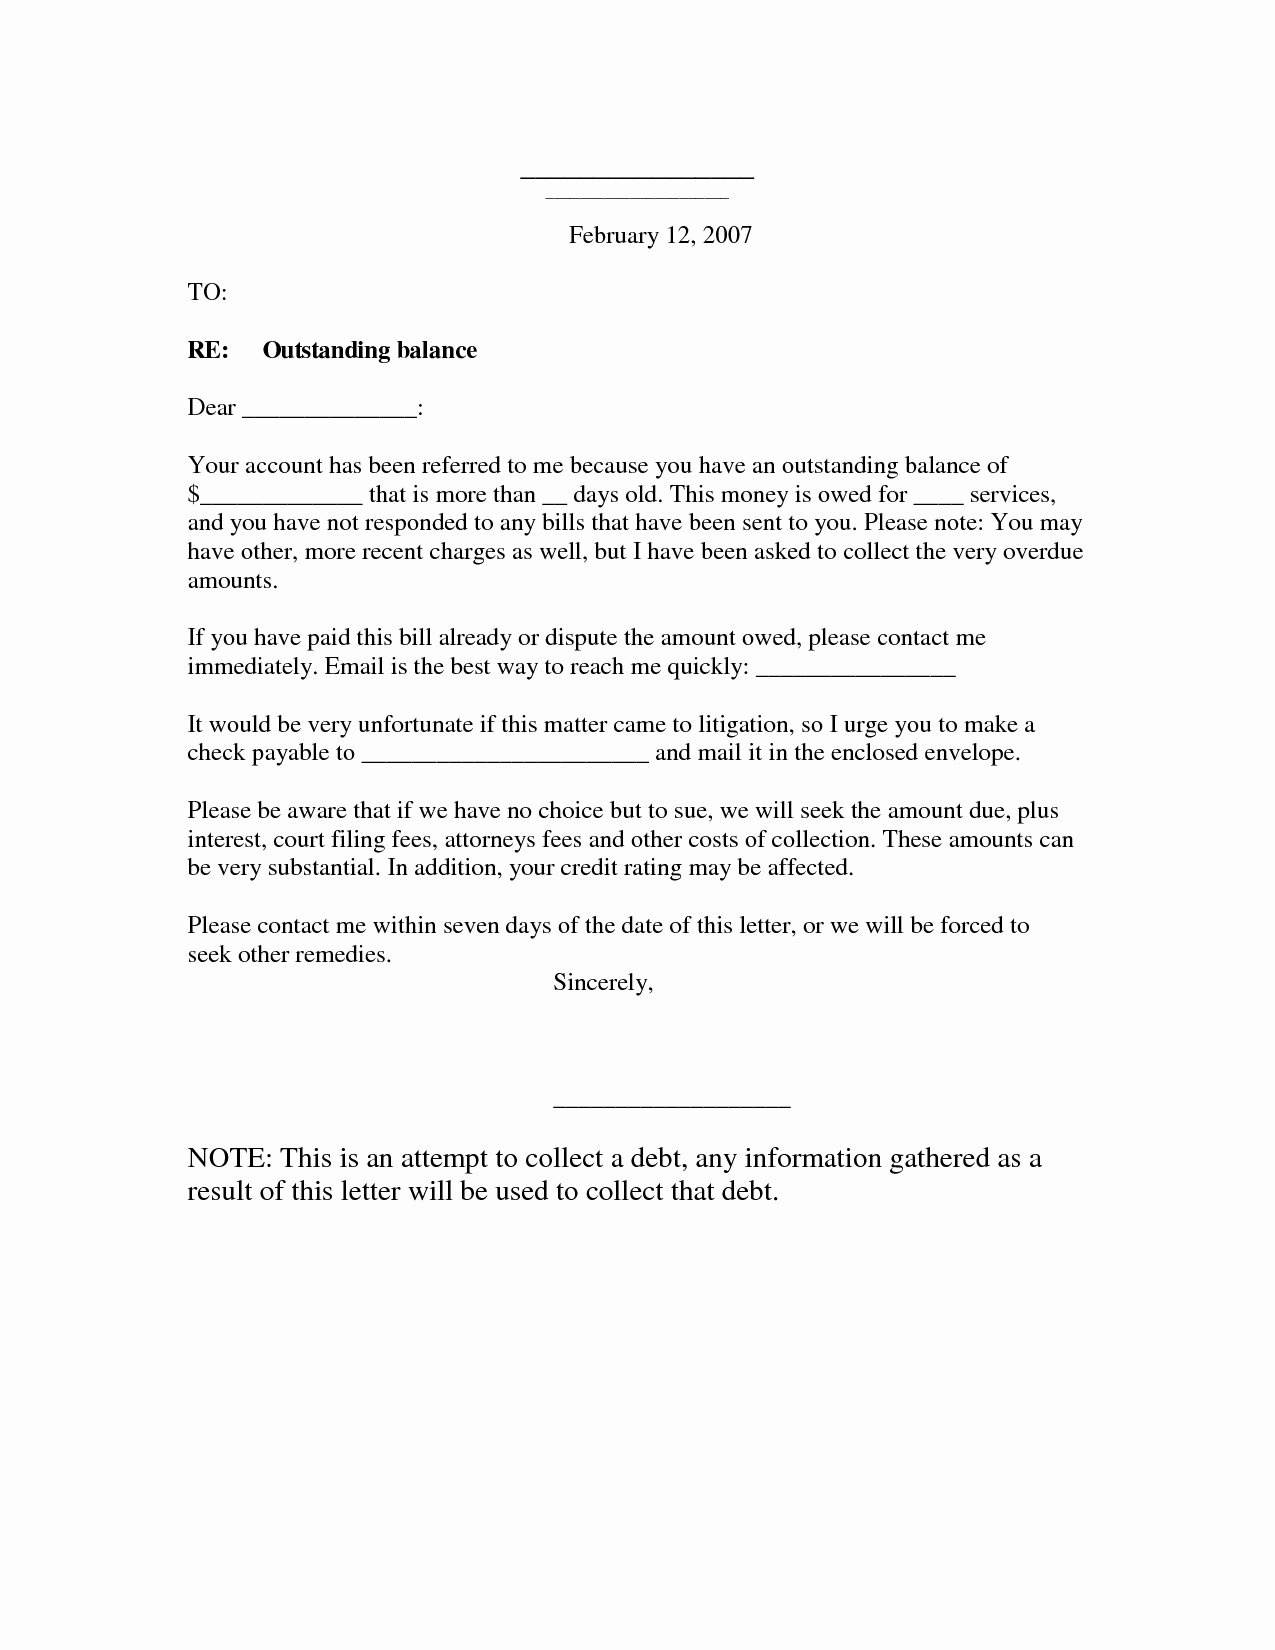 Letter Of Demand Template New Demand Letter Template for Money Owed Samples